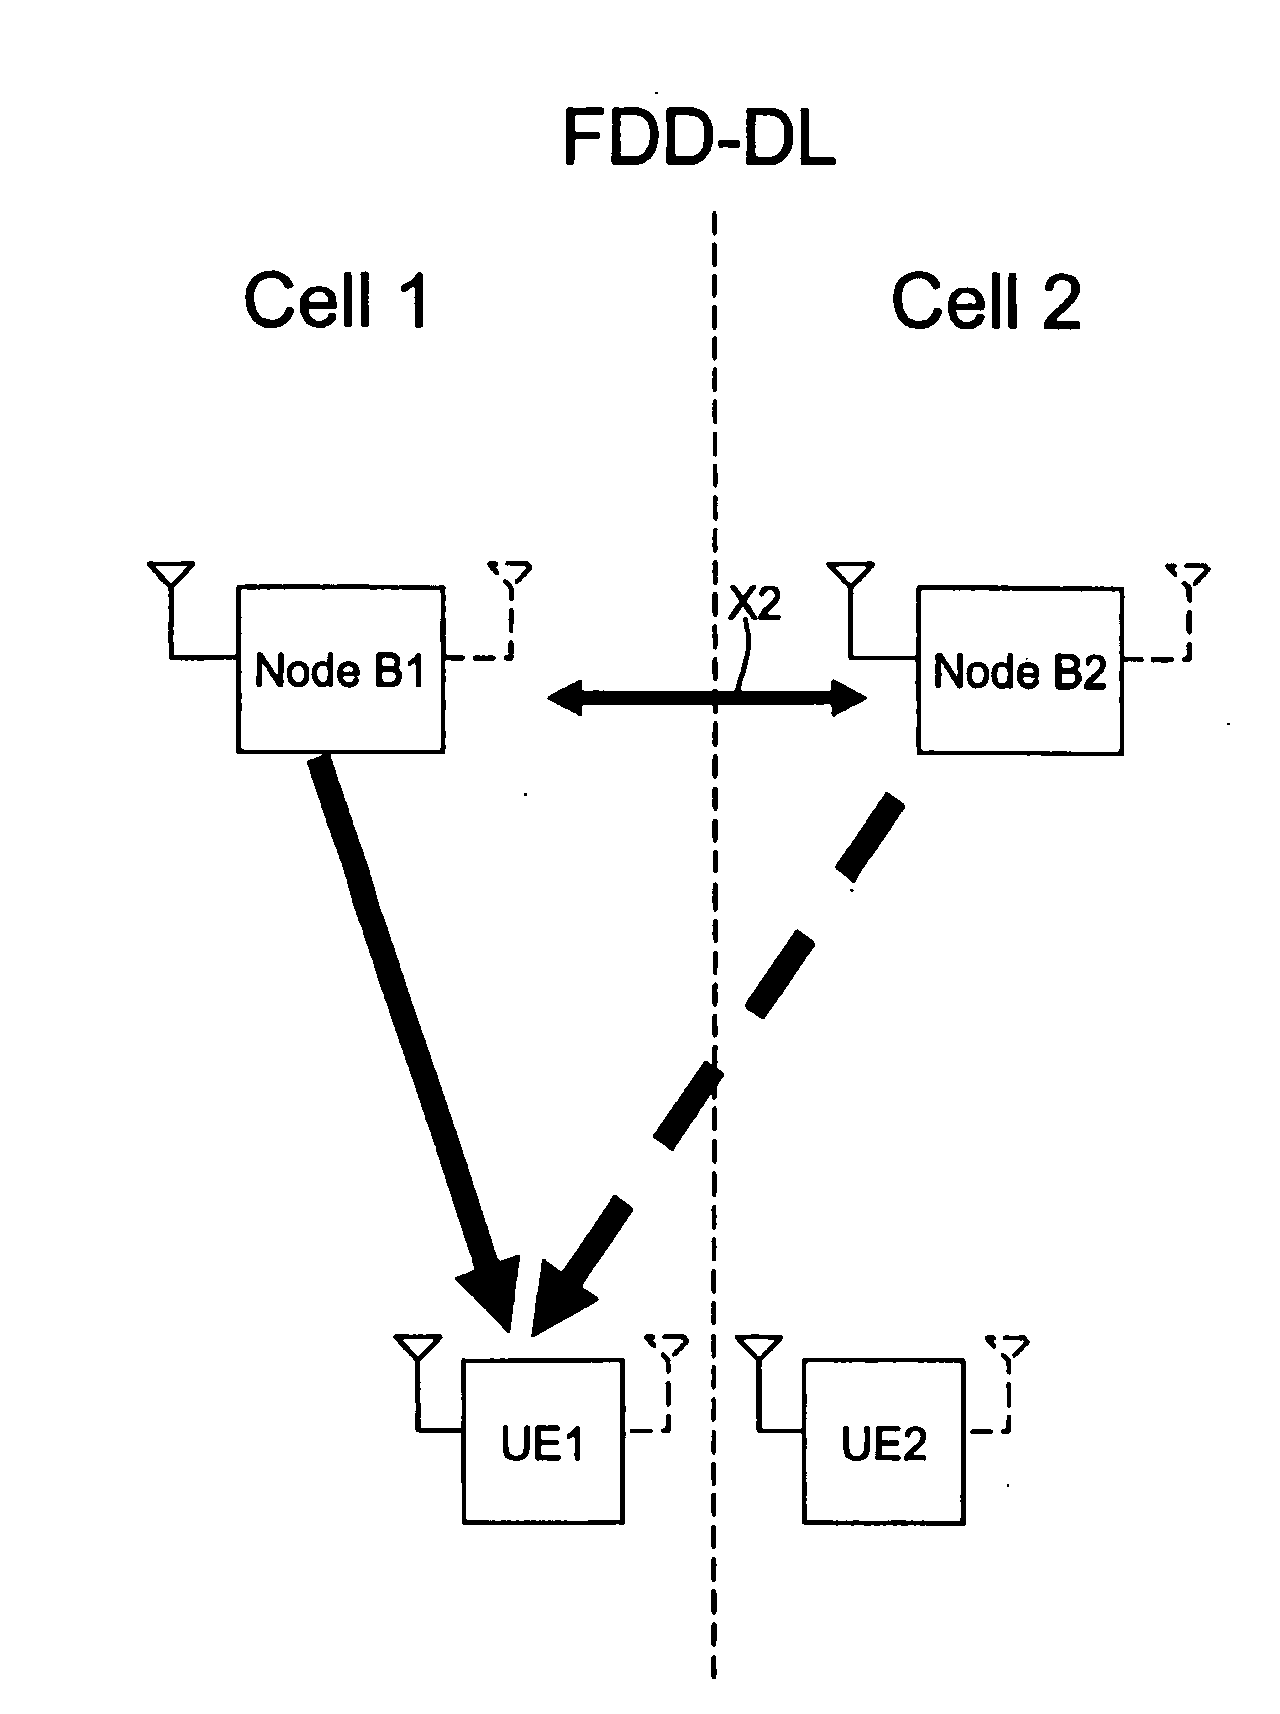 Characterization of co-channel interference in a wireless communication system, in particular a cellular radio communication system